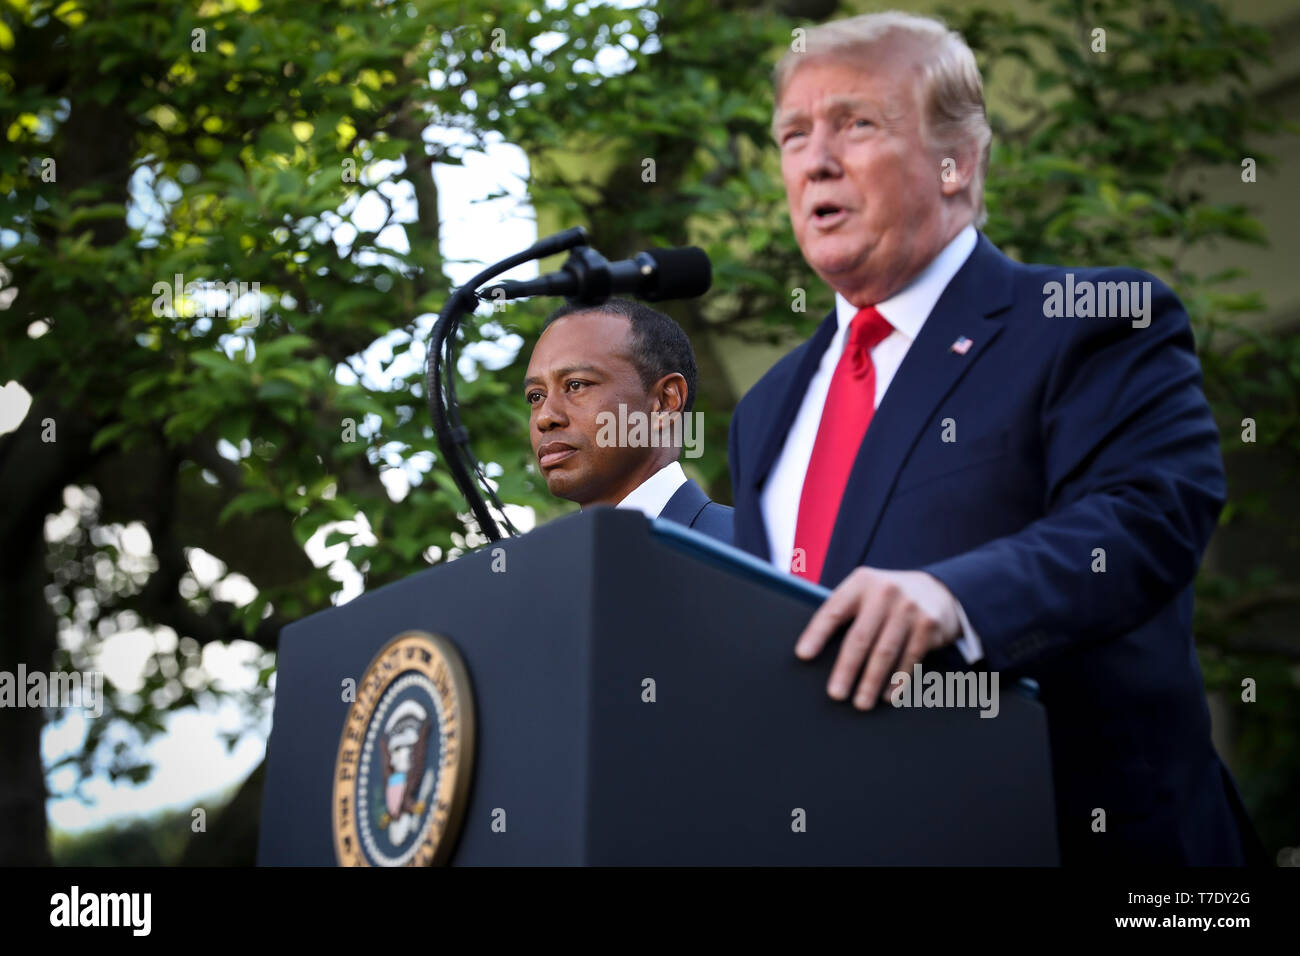 United States President Donald J. Trump delivers remarks during a ceremony in the Rose Garden of the White House to present the Presidential Medal of Freedom to Tiger Woods on May 6, 2019 in Washington, DC. Credit: Oliver Contreras/Pool via CNP /MediaPunch Stock Photo